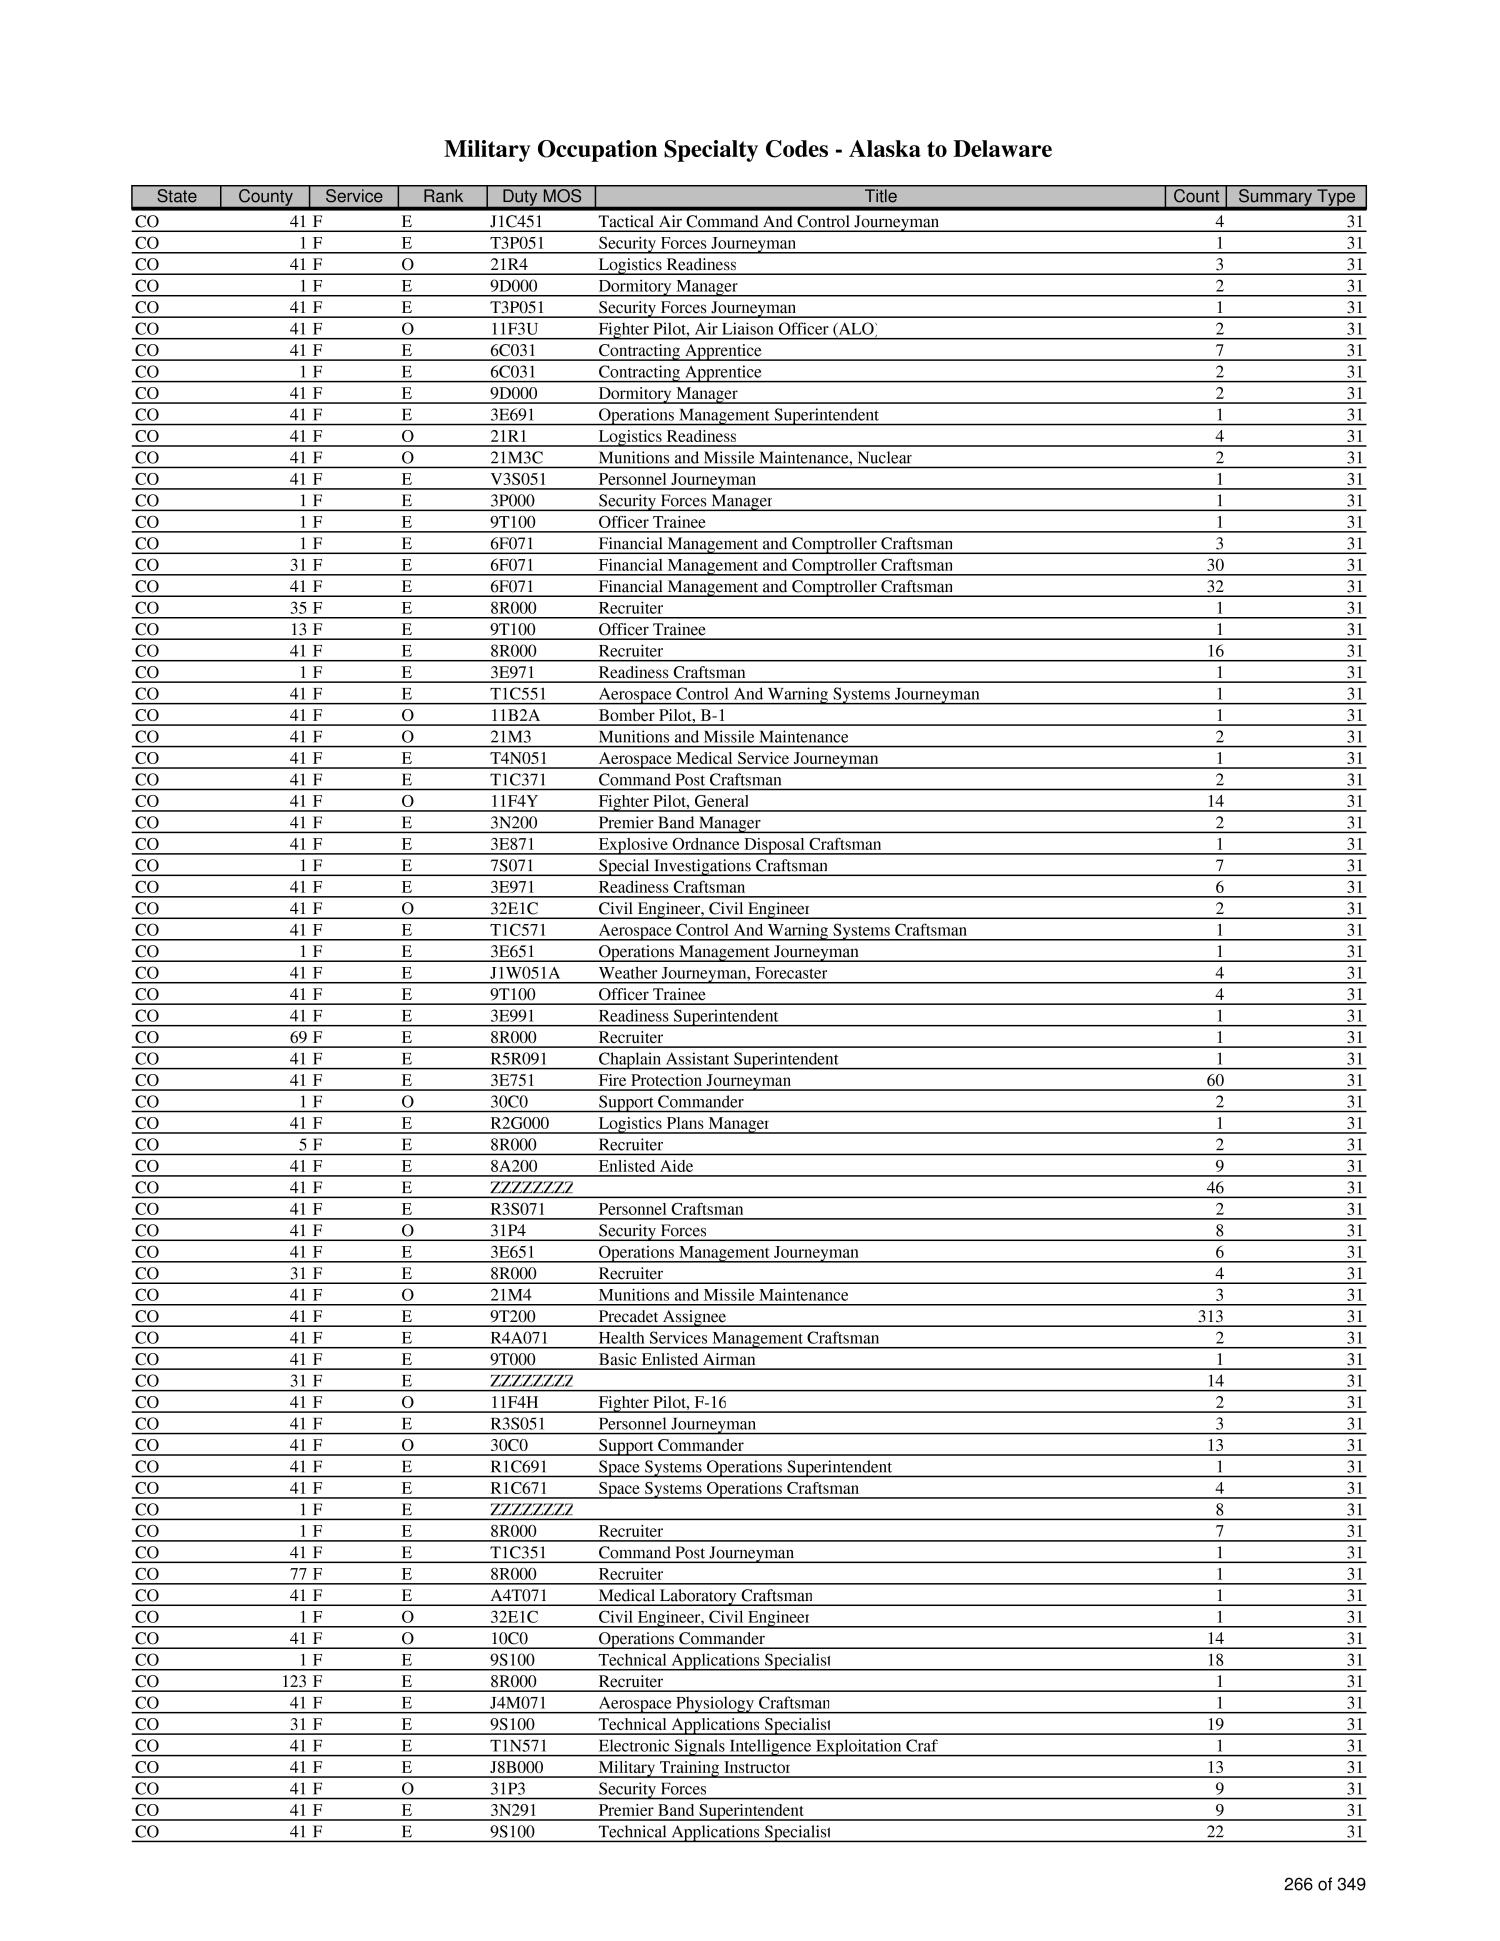 List of Military Occupation Specialty codes (MOS) by State and County